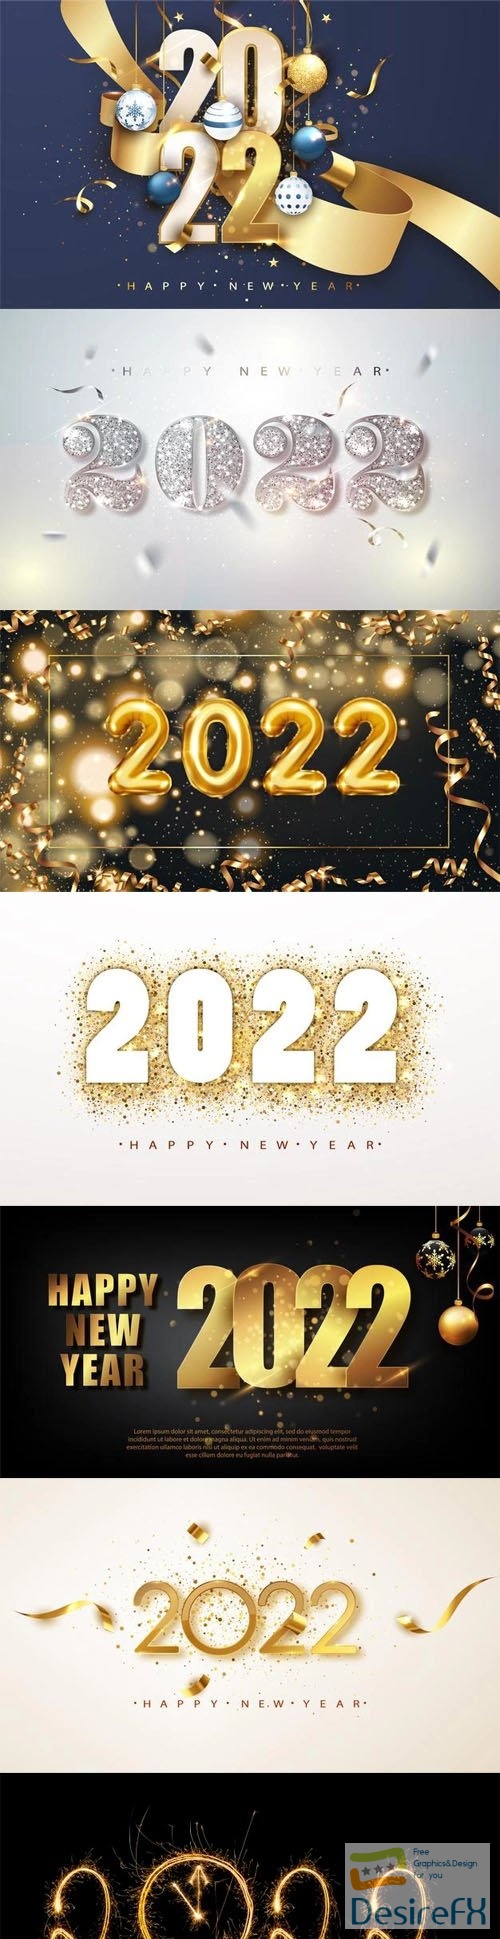 Happy New Year 2022 Banners &amp; Backgrounds Vector Templates